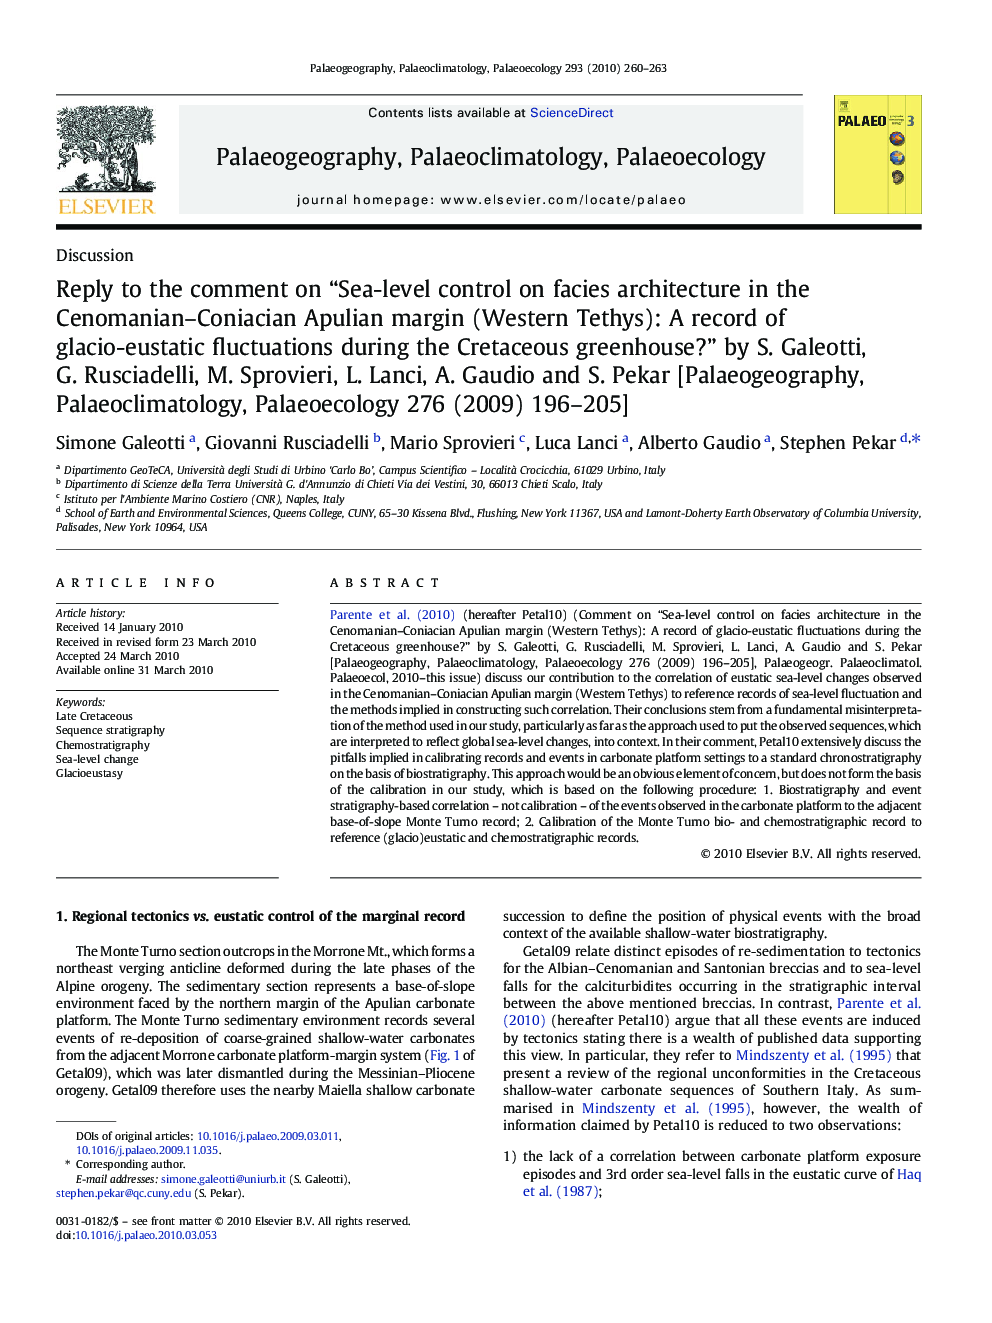 Reply to the comment on “Sea-level control on facies architecture in the Cenomanian–Coniacian Apulian margin (Western Tethys): A record of glacio-eustatic fluctuations during the Cretaceous greenhouse?” by S. Galeotti, G. Rusciadelli, M. Sprovieri, L. Lan